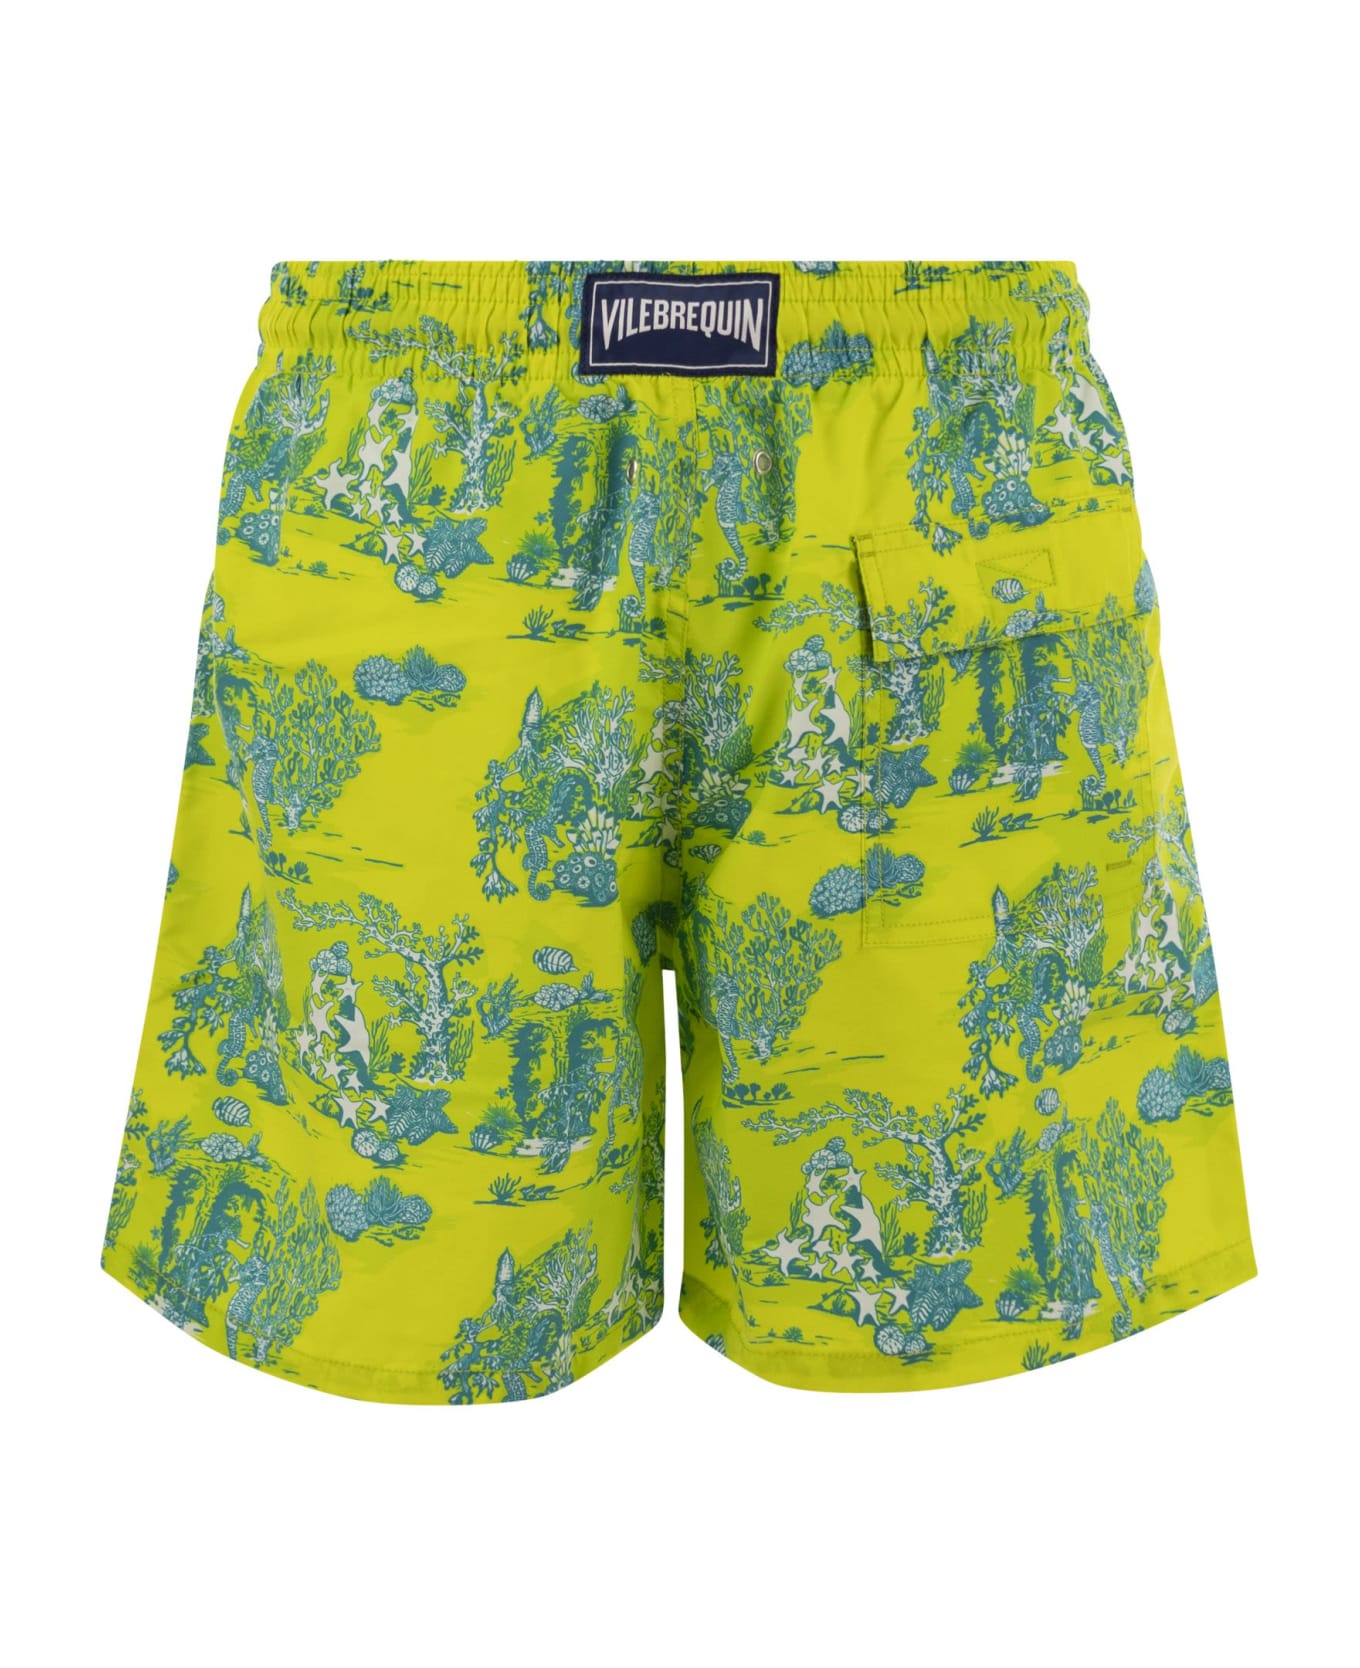 Vilebrequin Swimming Shorts With Seabed - Yellow